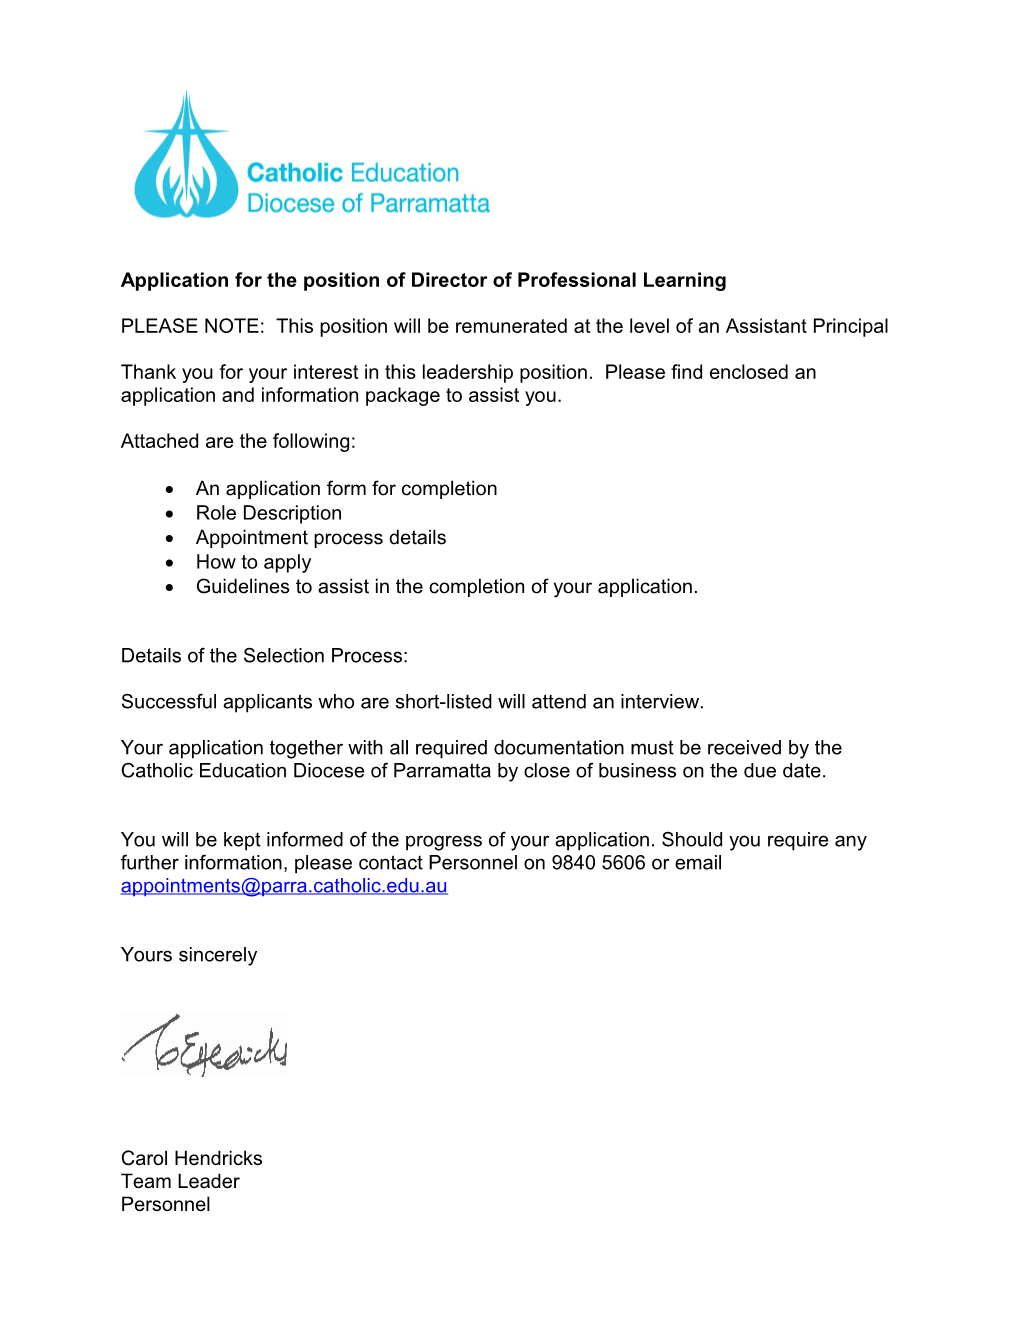 Application for the Position of Director of Professional Learning